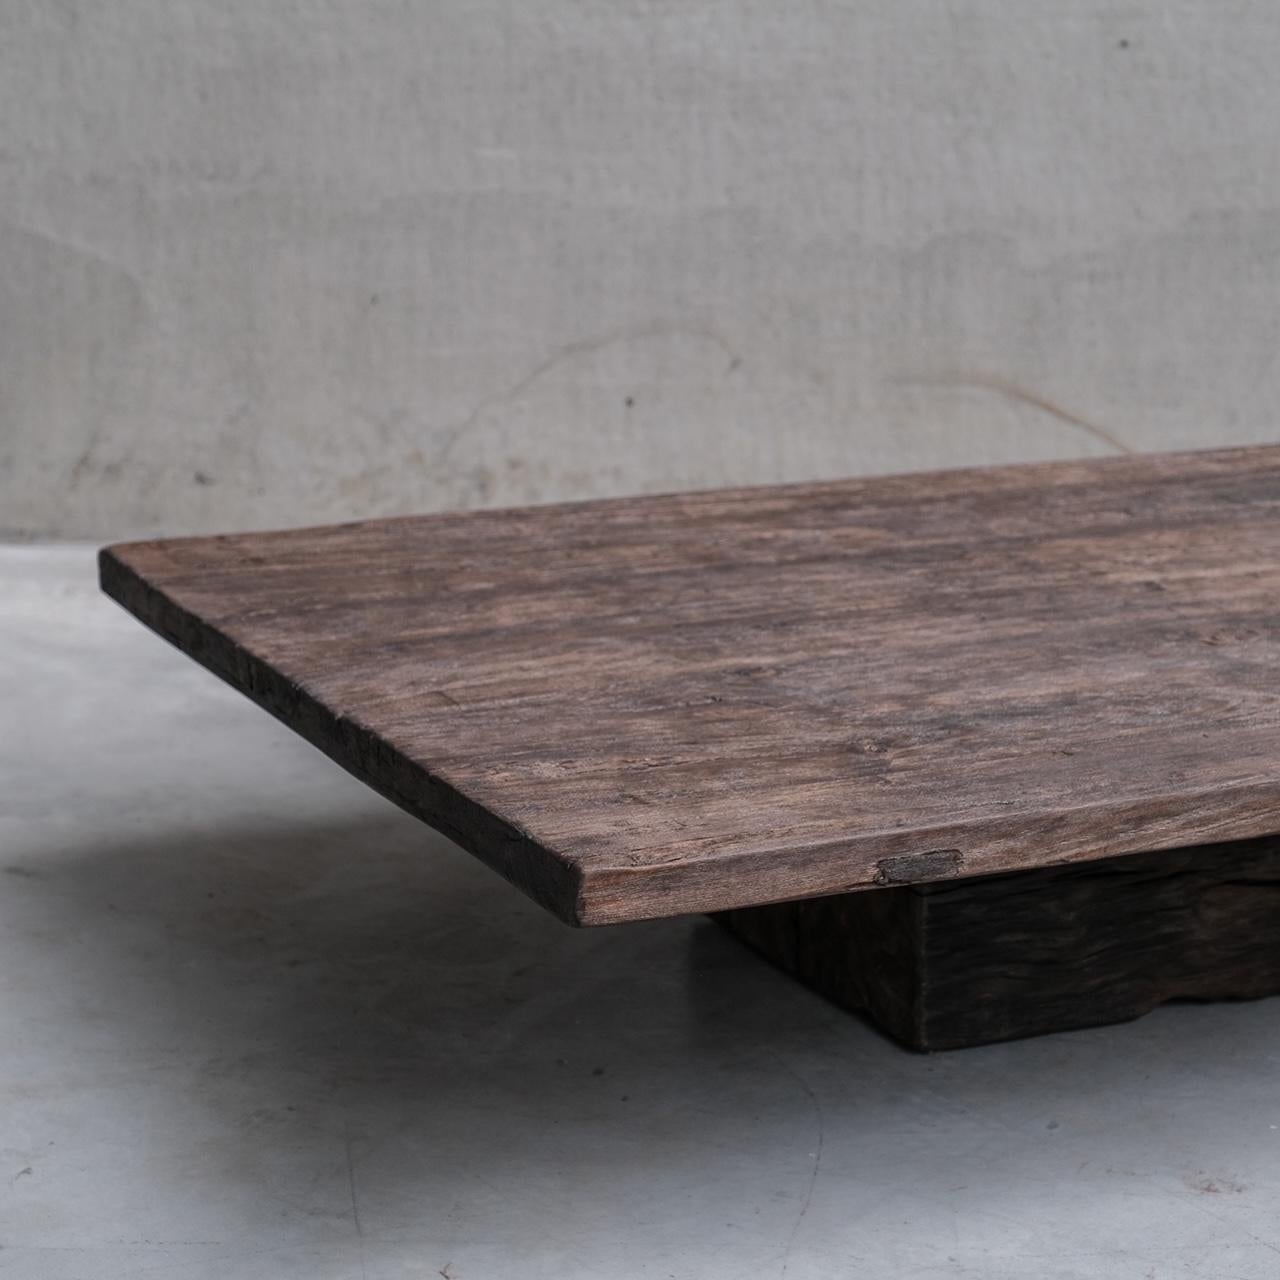 Primitive Wabi-Sabi Esque Wooden Coffee Table In Good Condition For Sale In London, GB